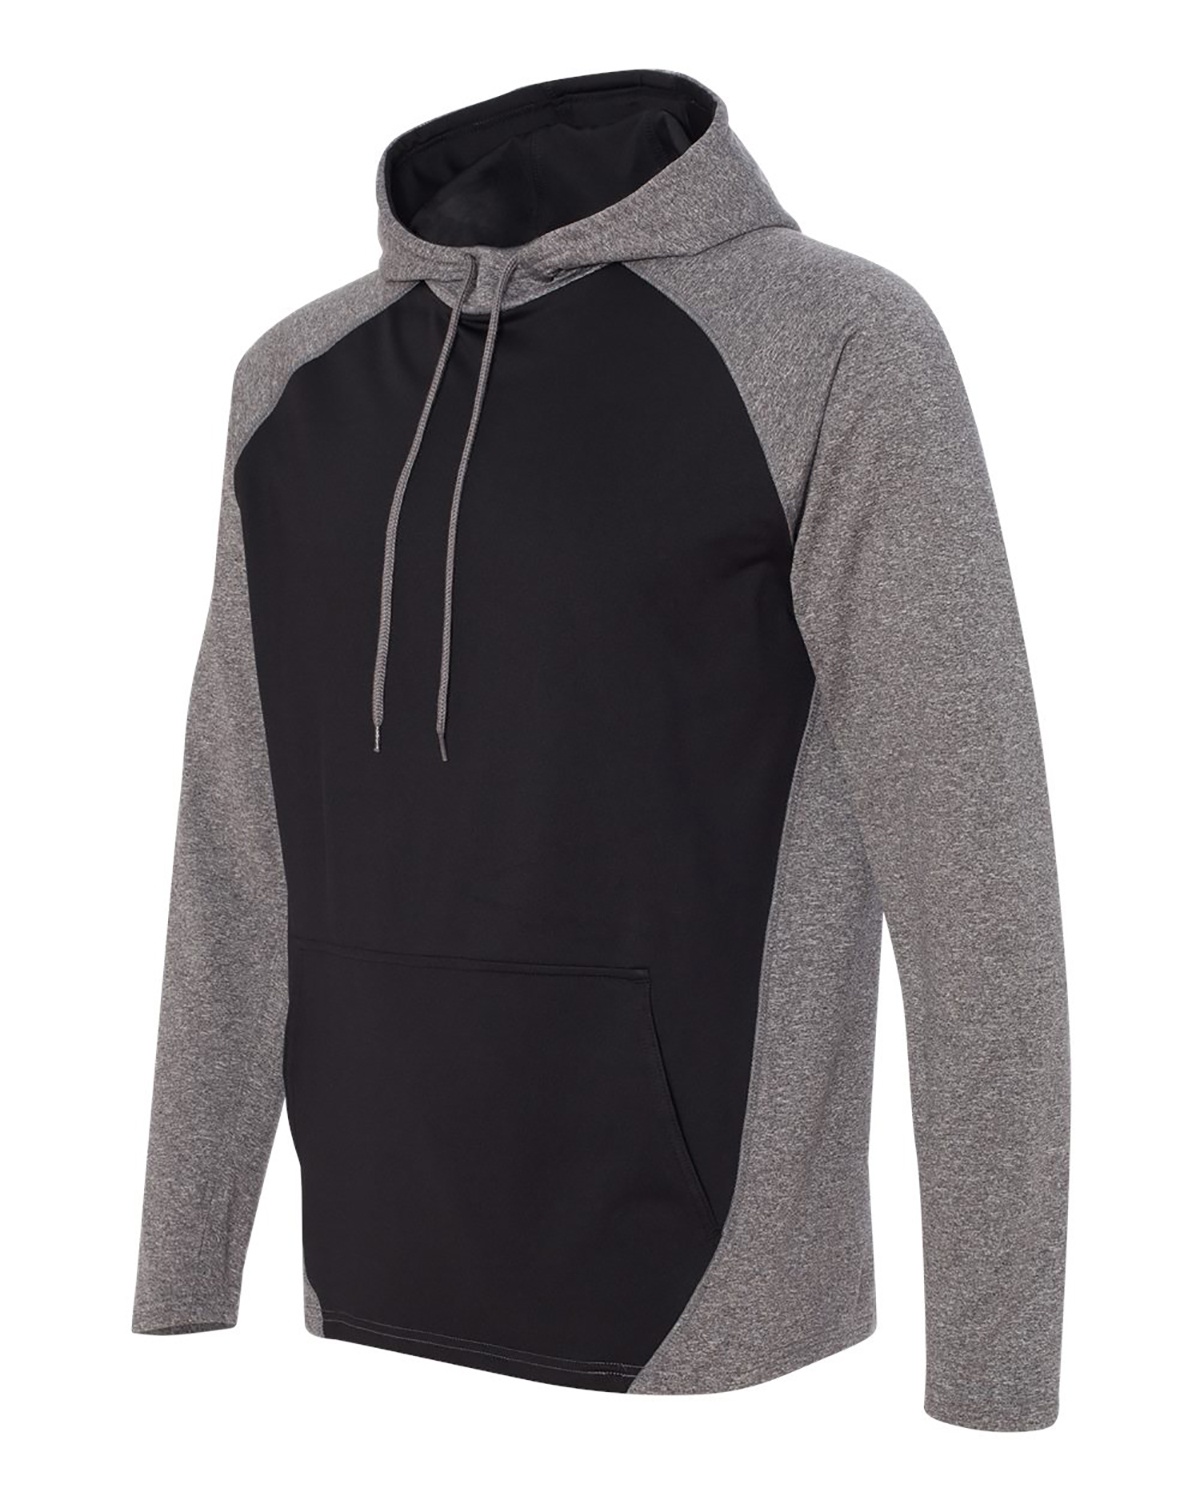 'Augusta Sportswear 4762 Adult Wicking Brushed Back Poly/Span Hoody'